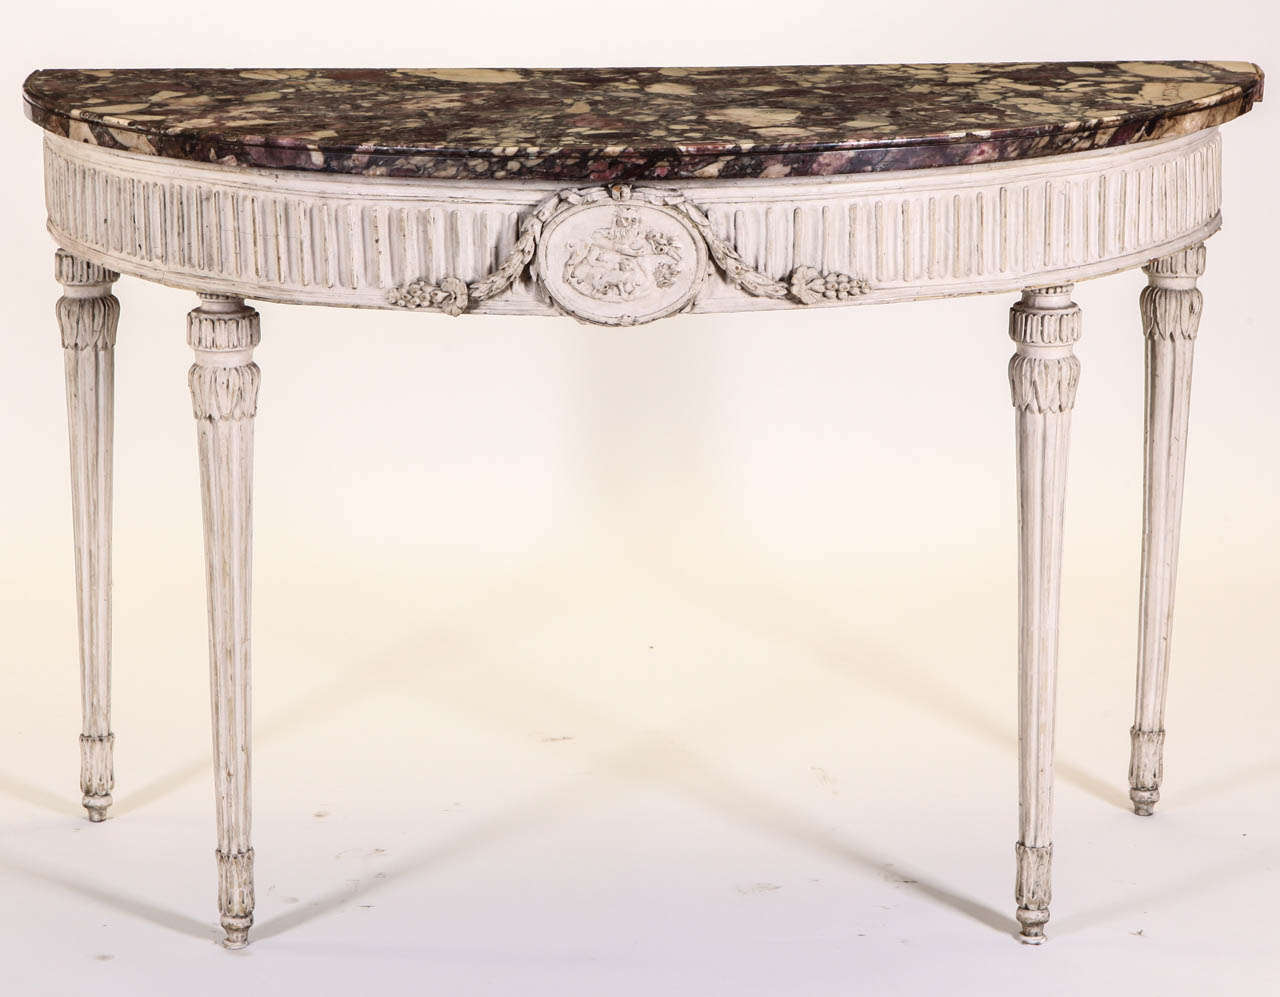 Hand-Painted Italian 18th Century Demilune Ivory Painted Console Table Louis XVI Period For Sale